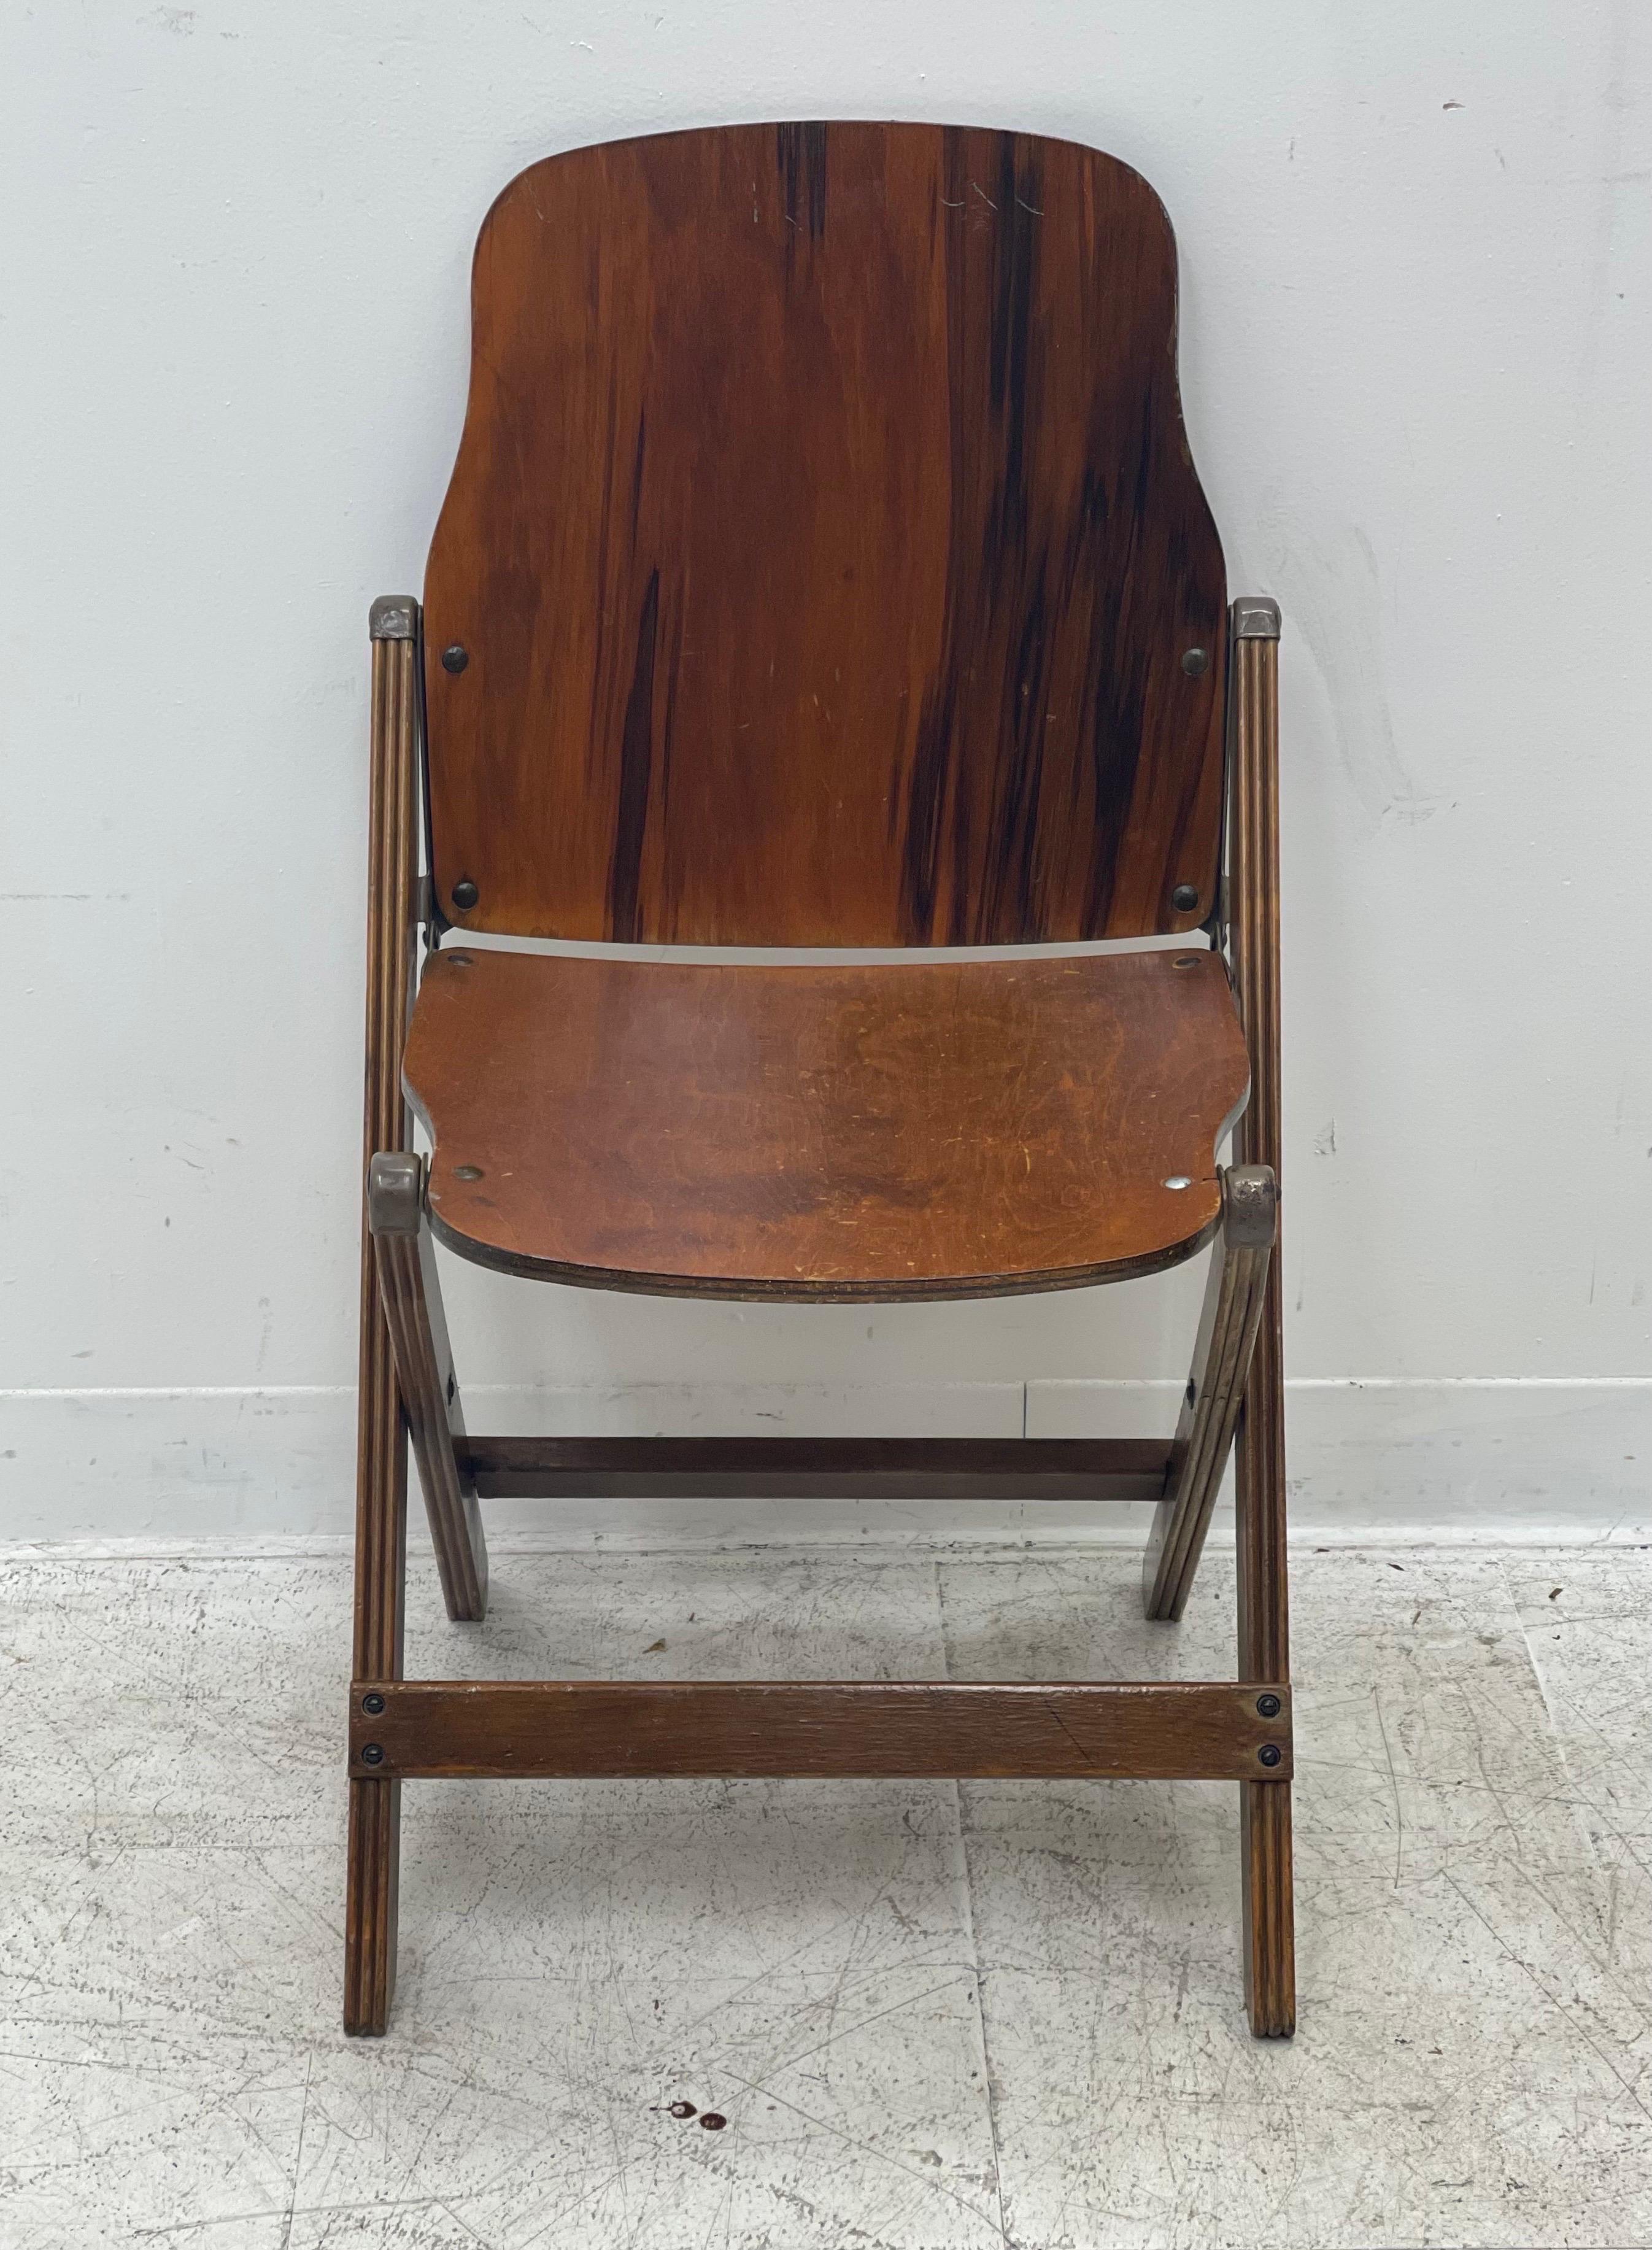 Vintage Wooden Folding Chair In Good Condition For Sale In Seattle, WA